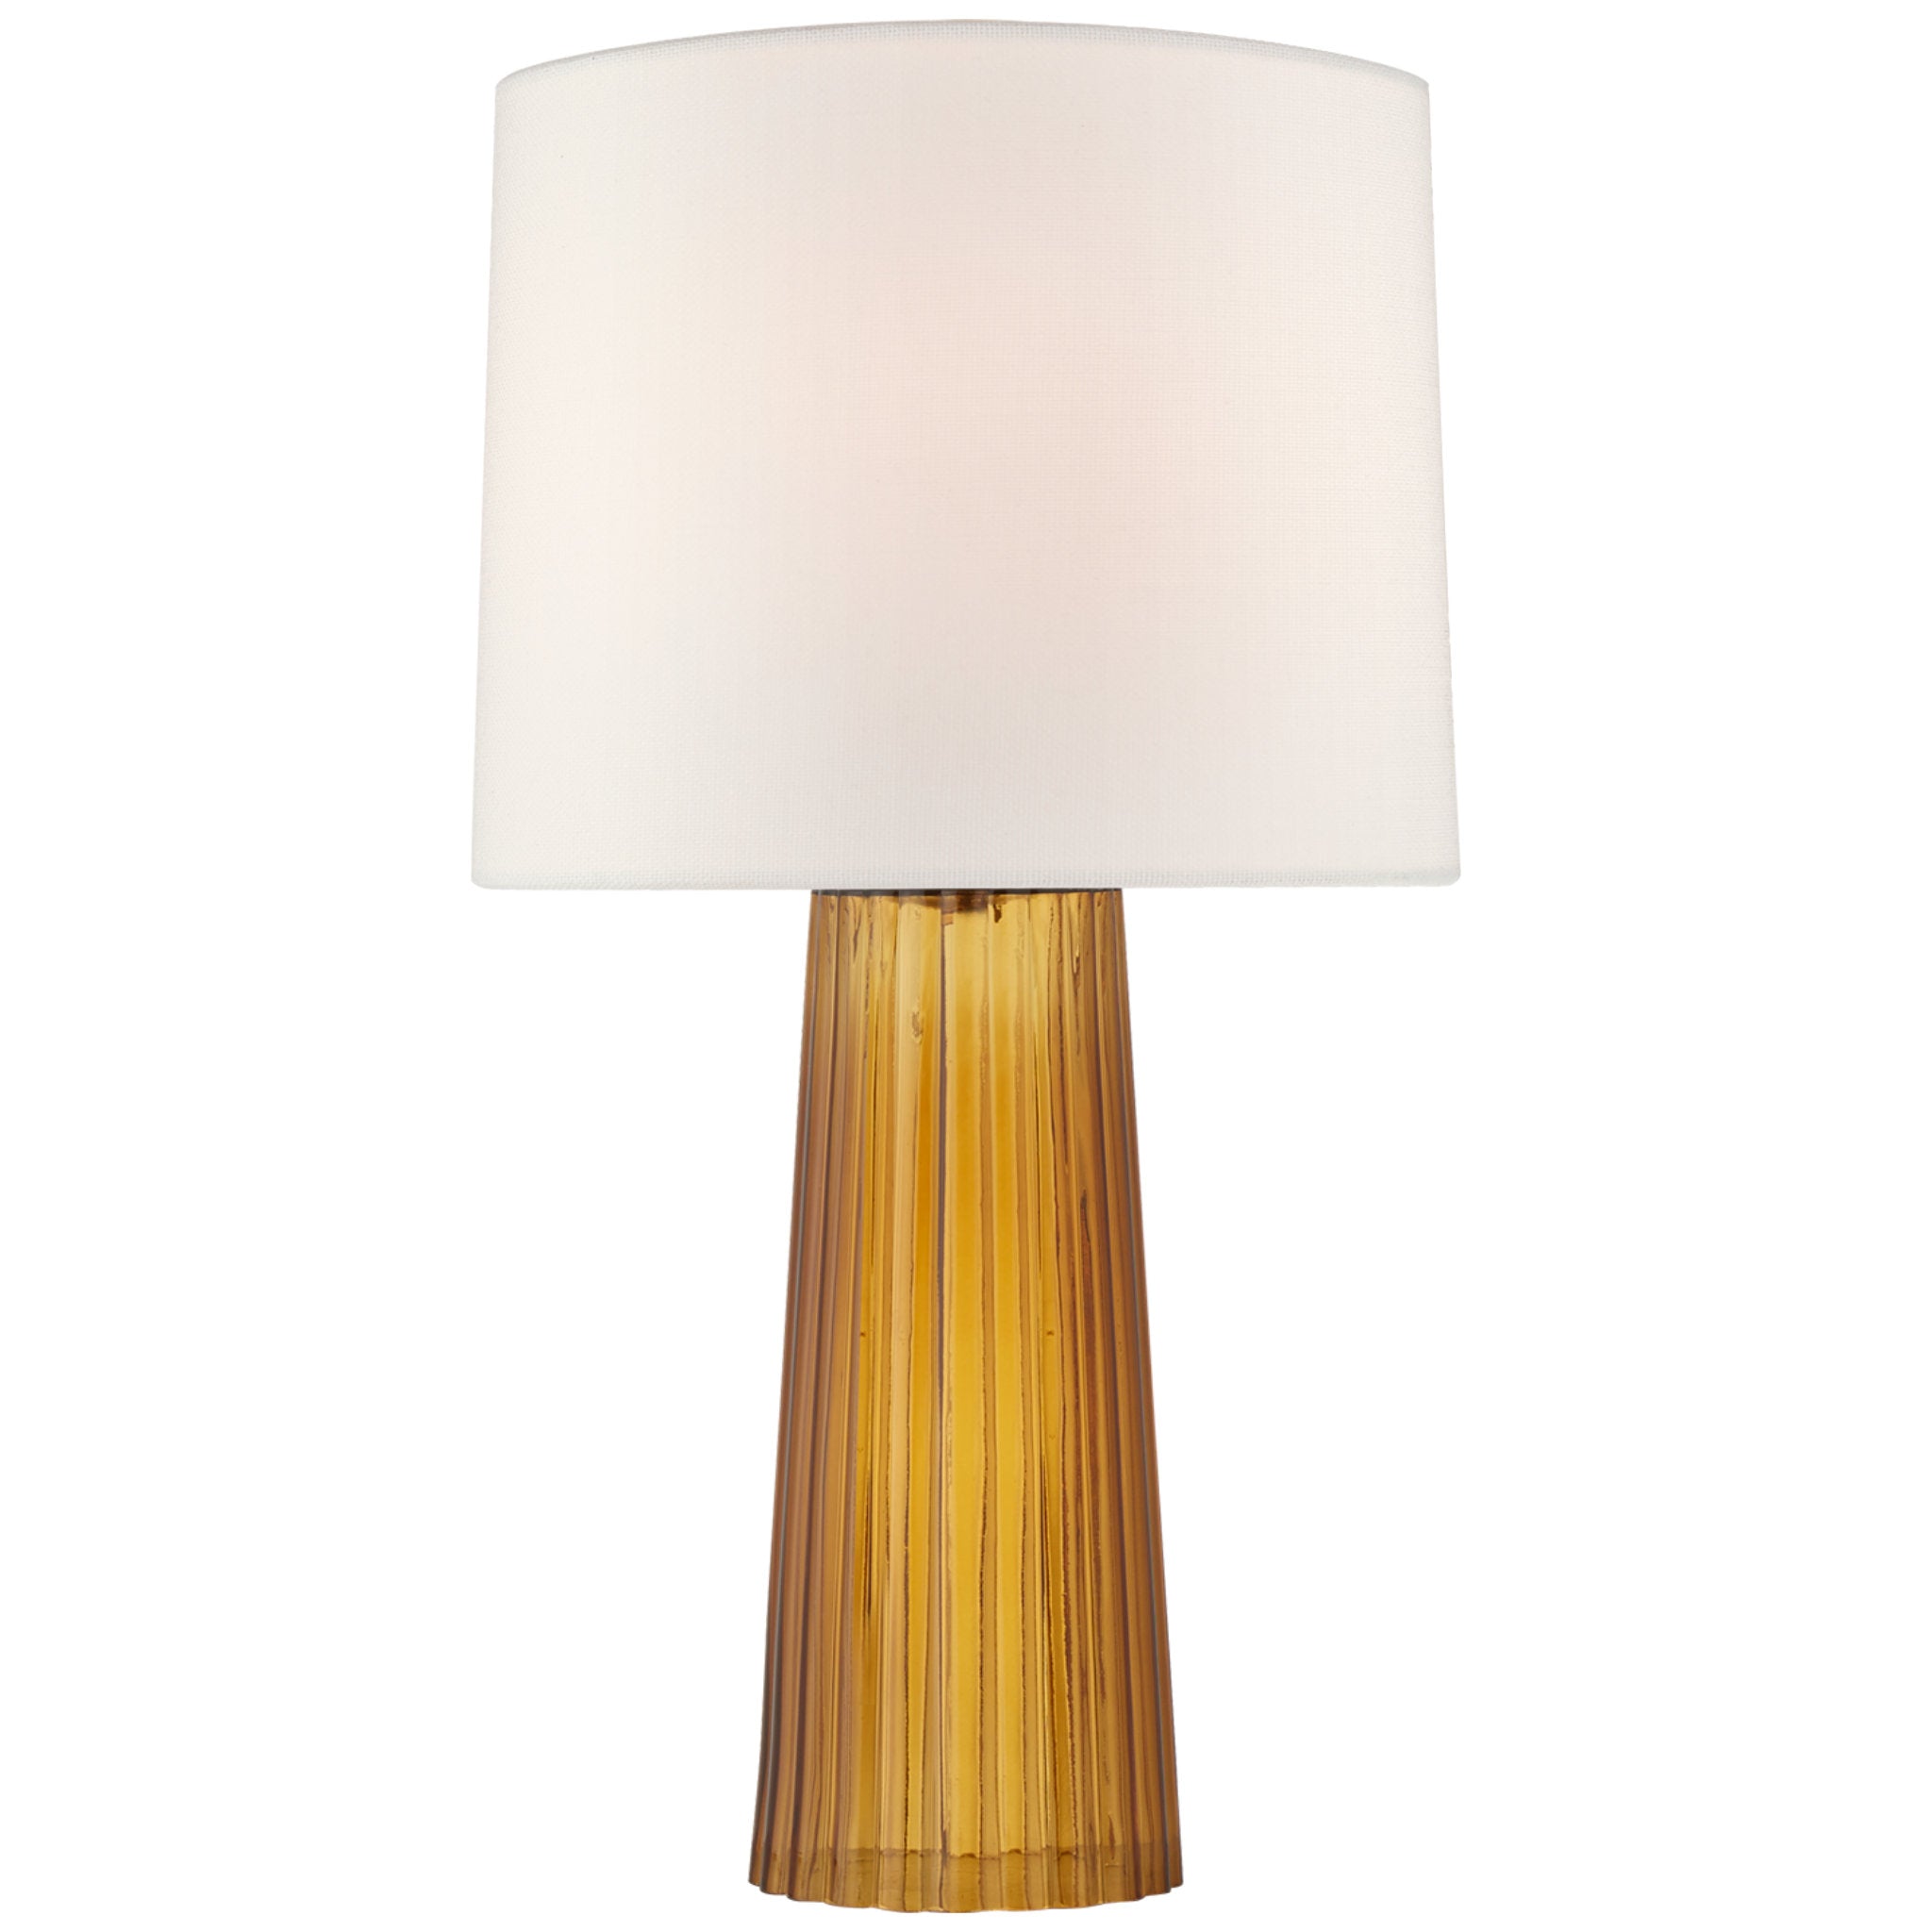 Barbara Barry Danube Medium Table Lamp in Amber with Linen Shade